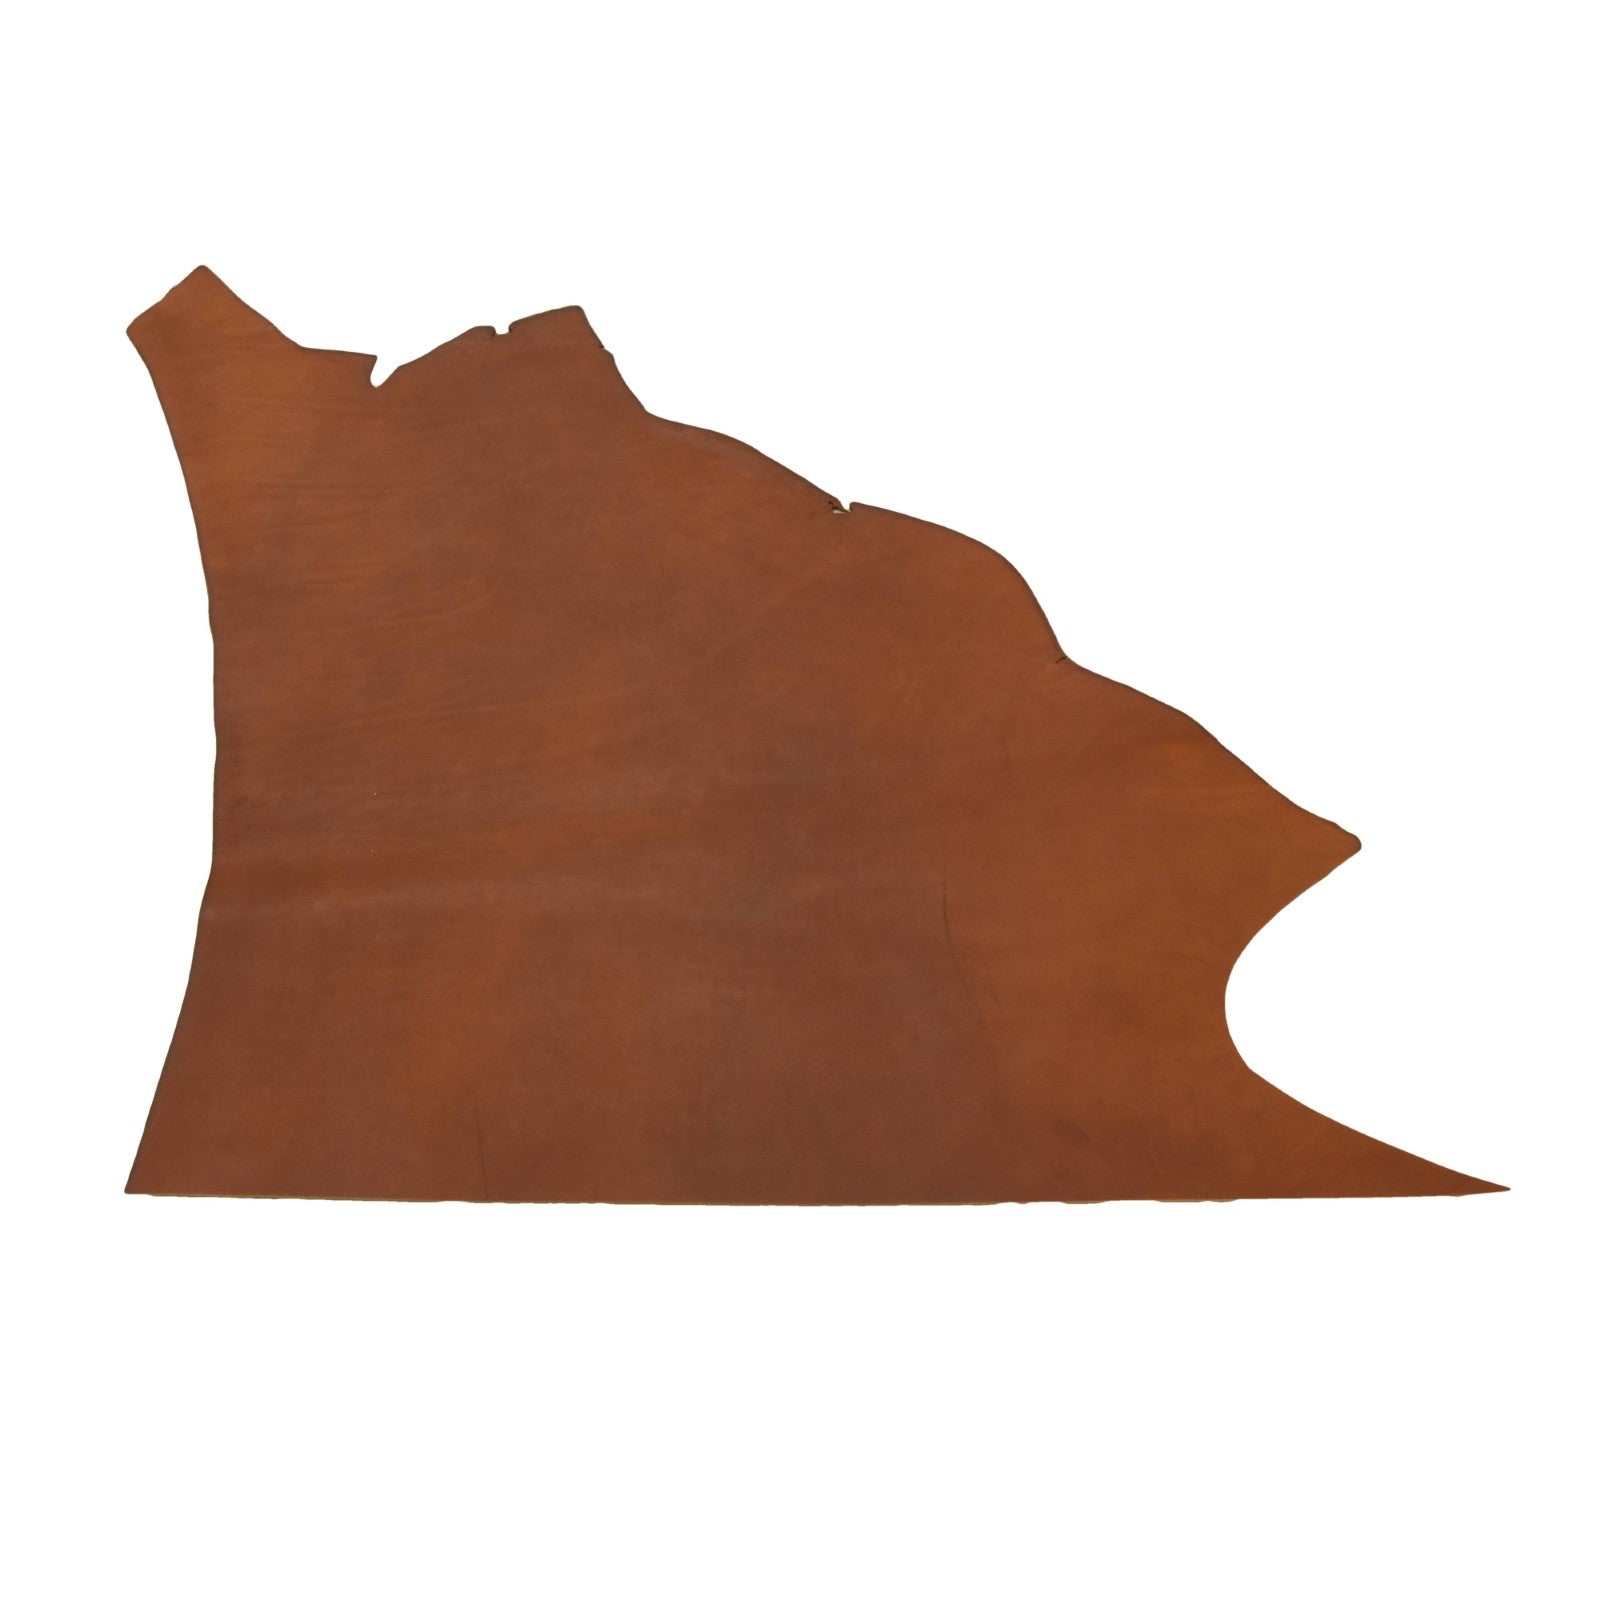 Rustic Russet Red Foothills, Oil Tanned Hides, Summits Edge, 6.5 - 7.5 Sq Ft / Project Piece (Top) | The Leather Guy